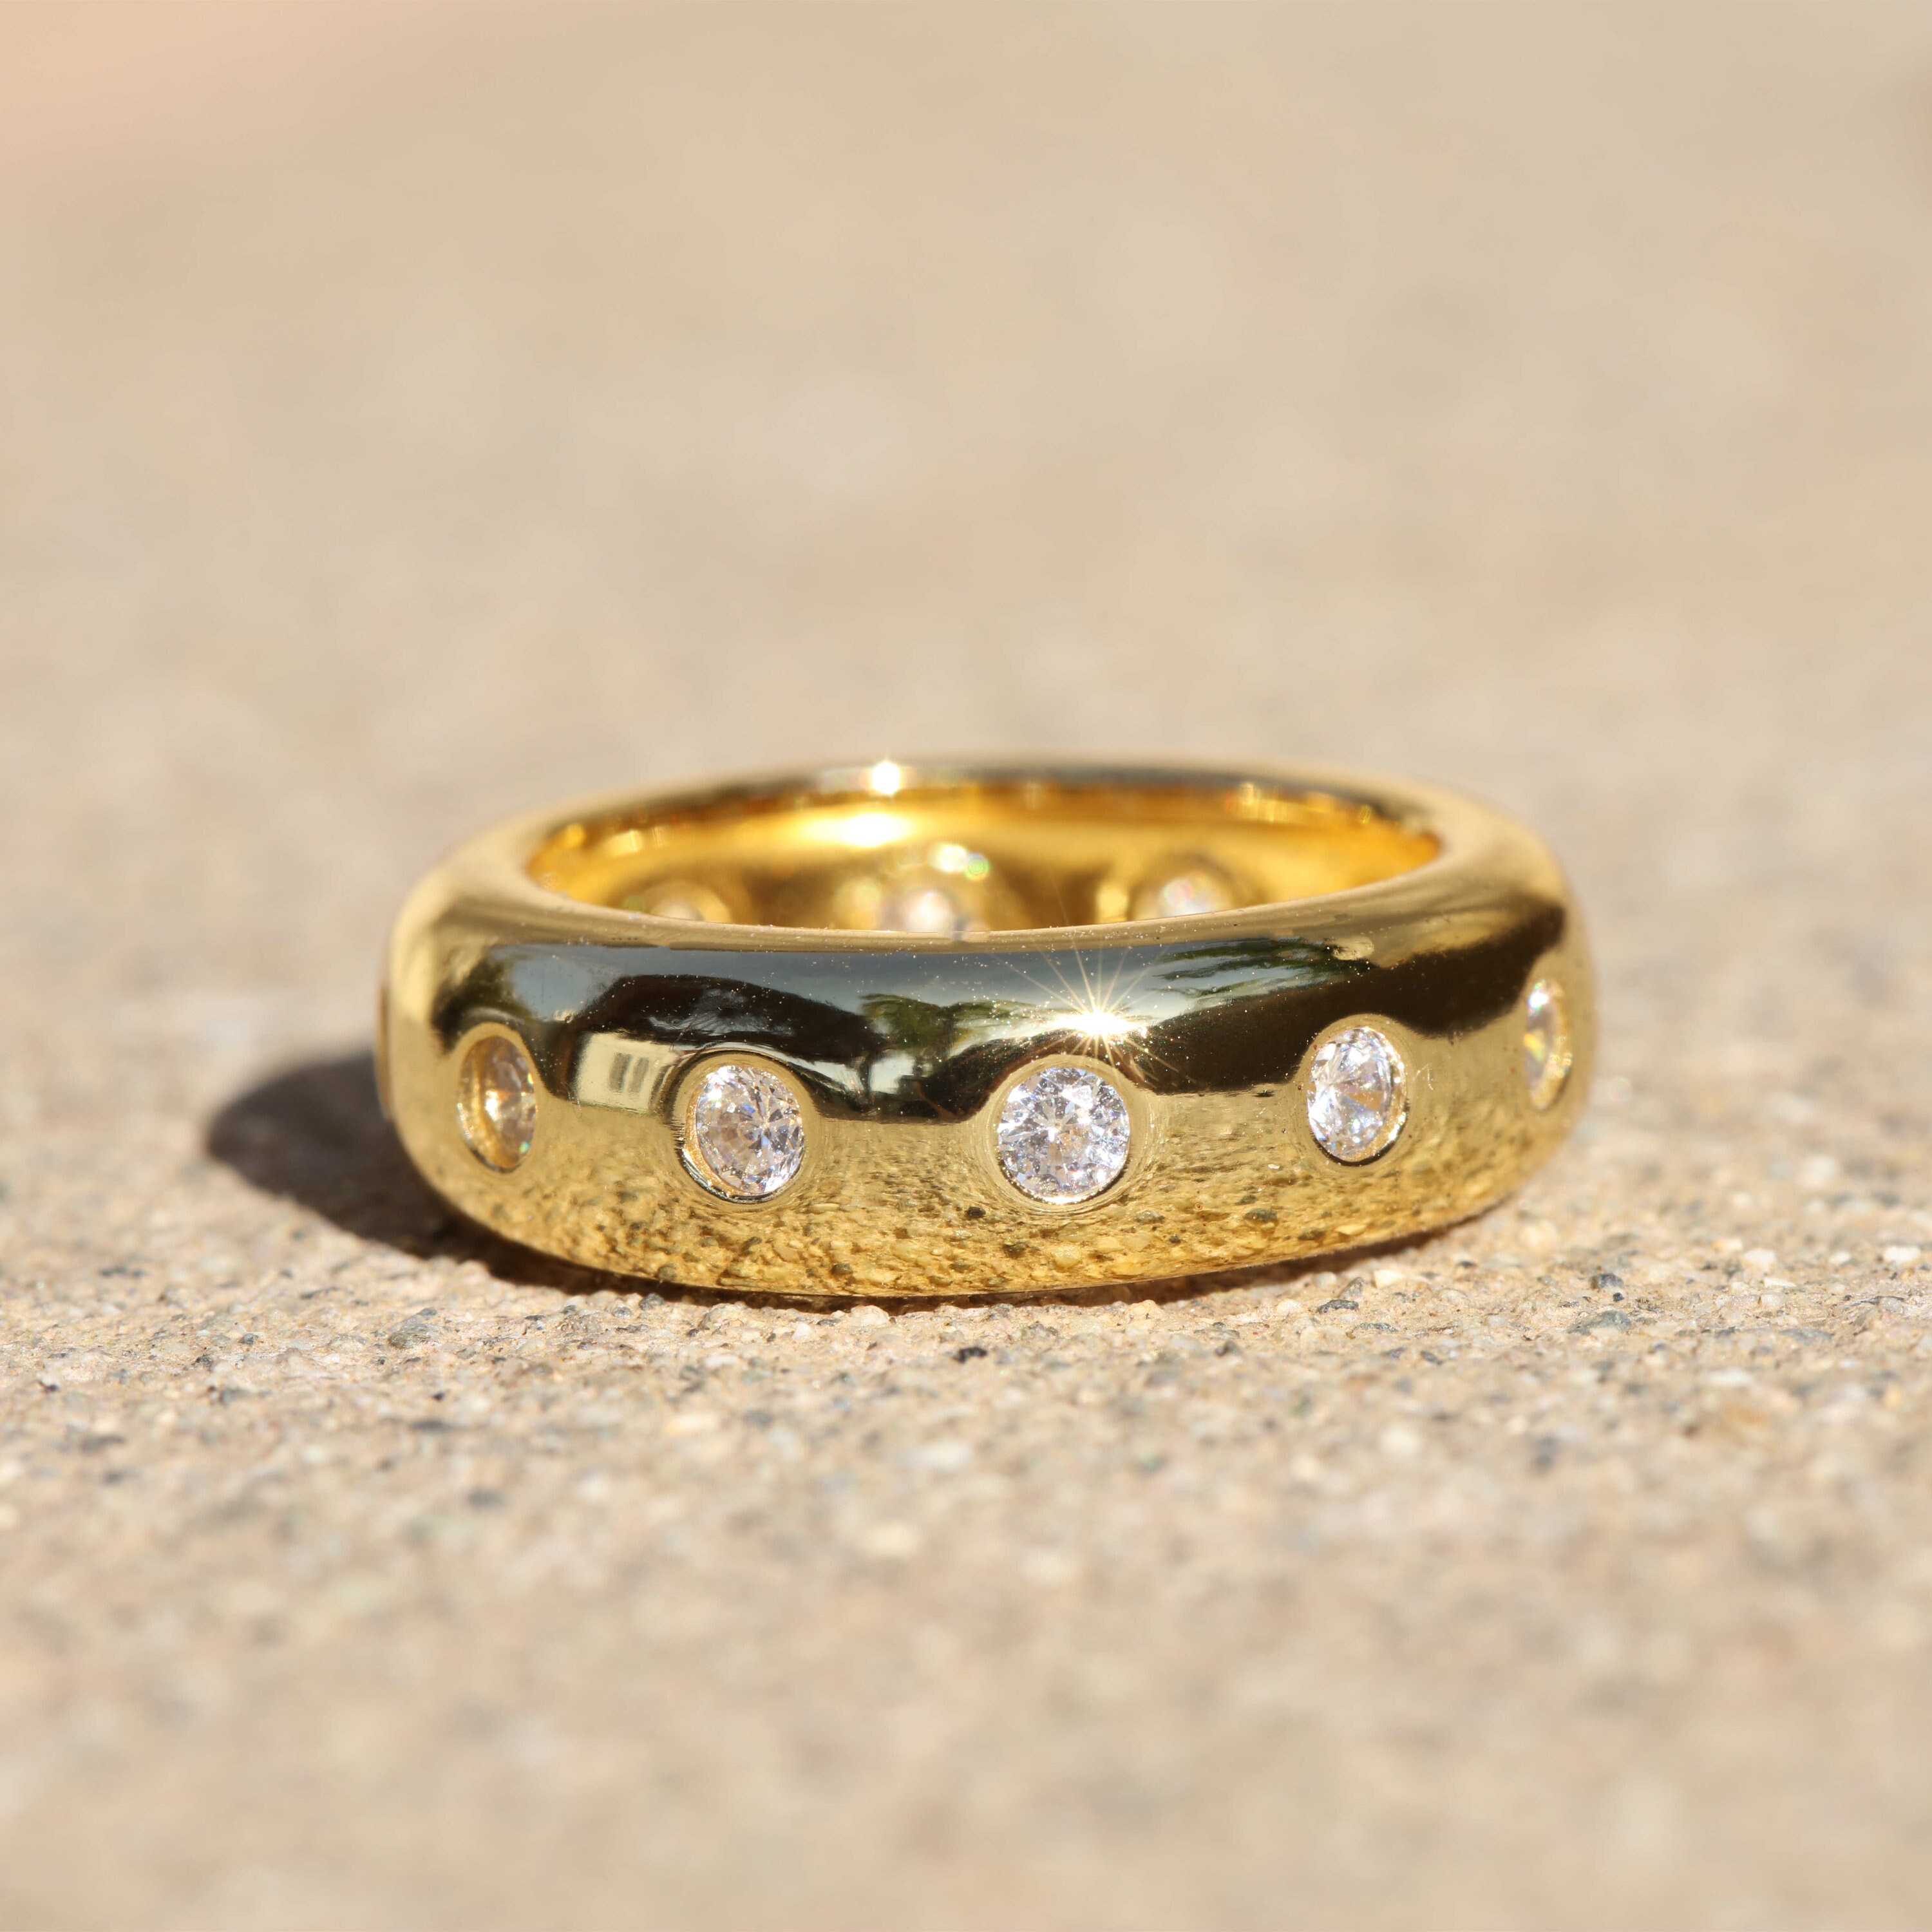 Shop Delish's New Donut Ring That We Added To Our Jewelry Line